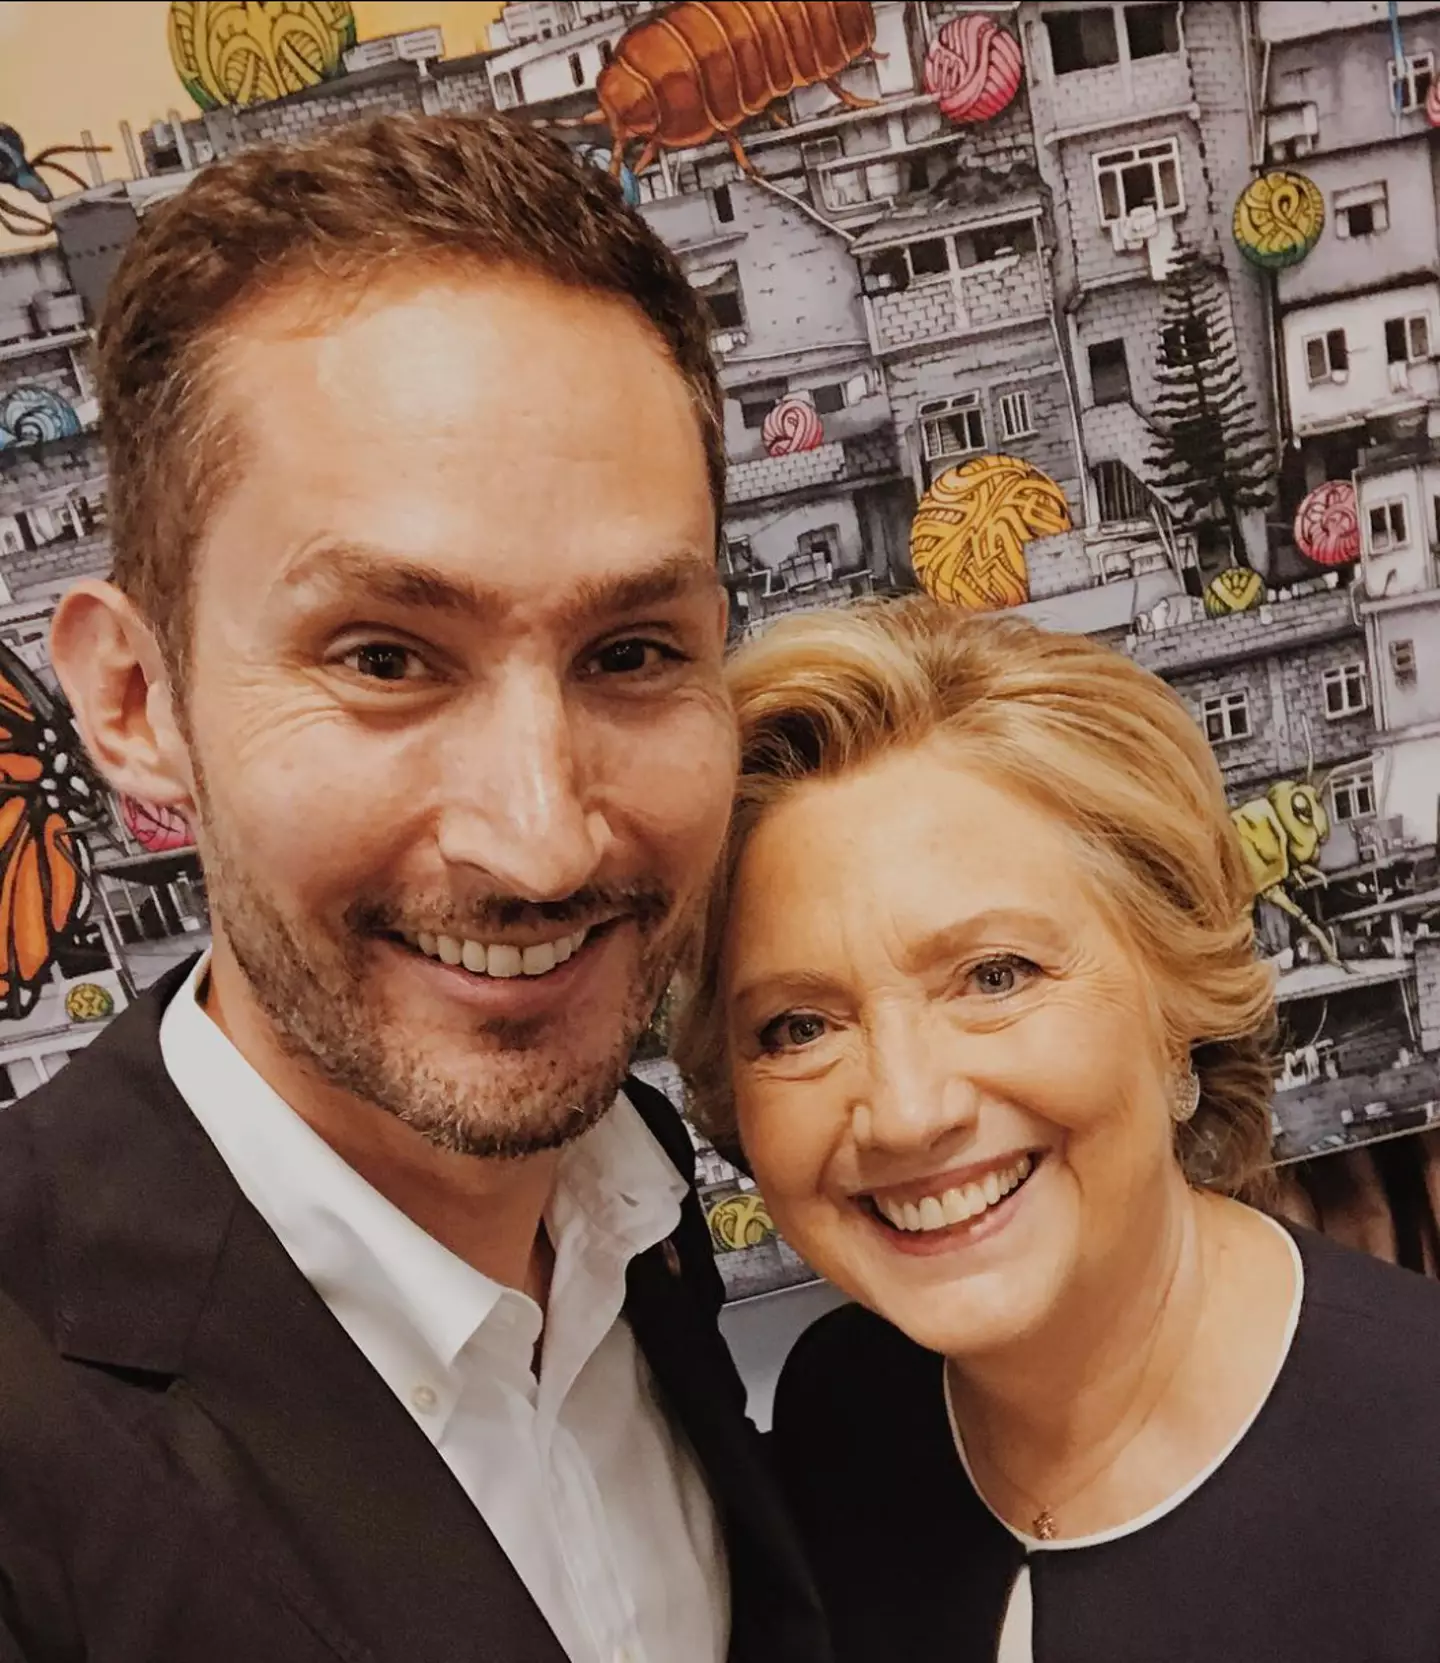 Kevin Systrom with Hillary Clinton.